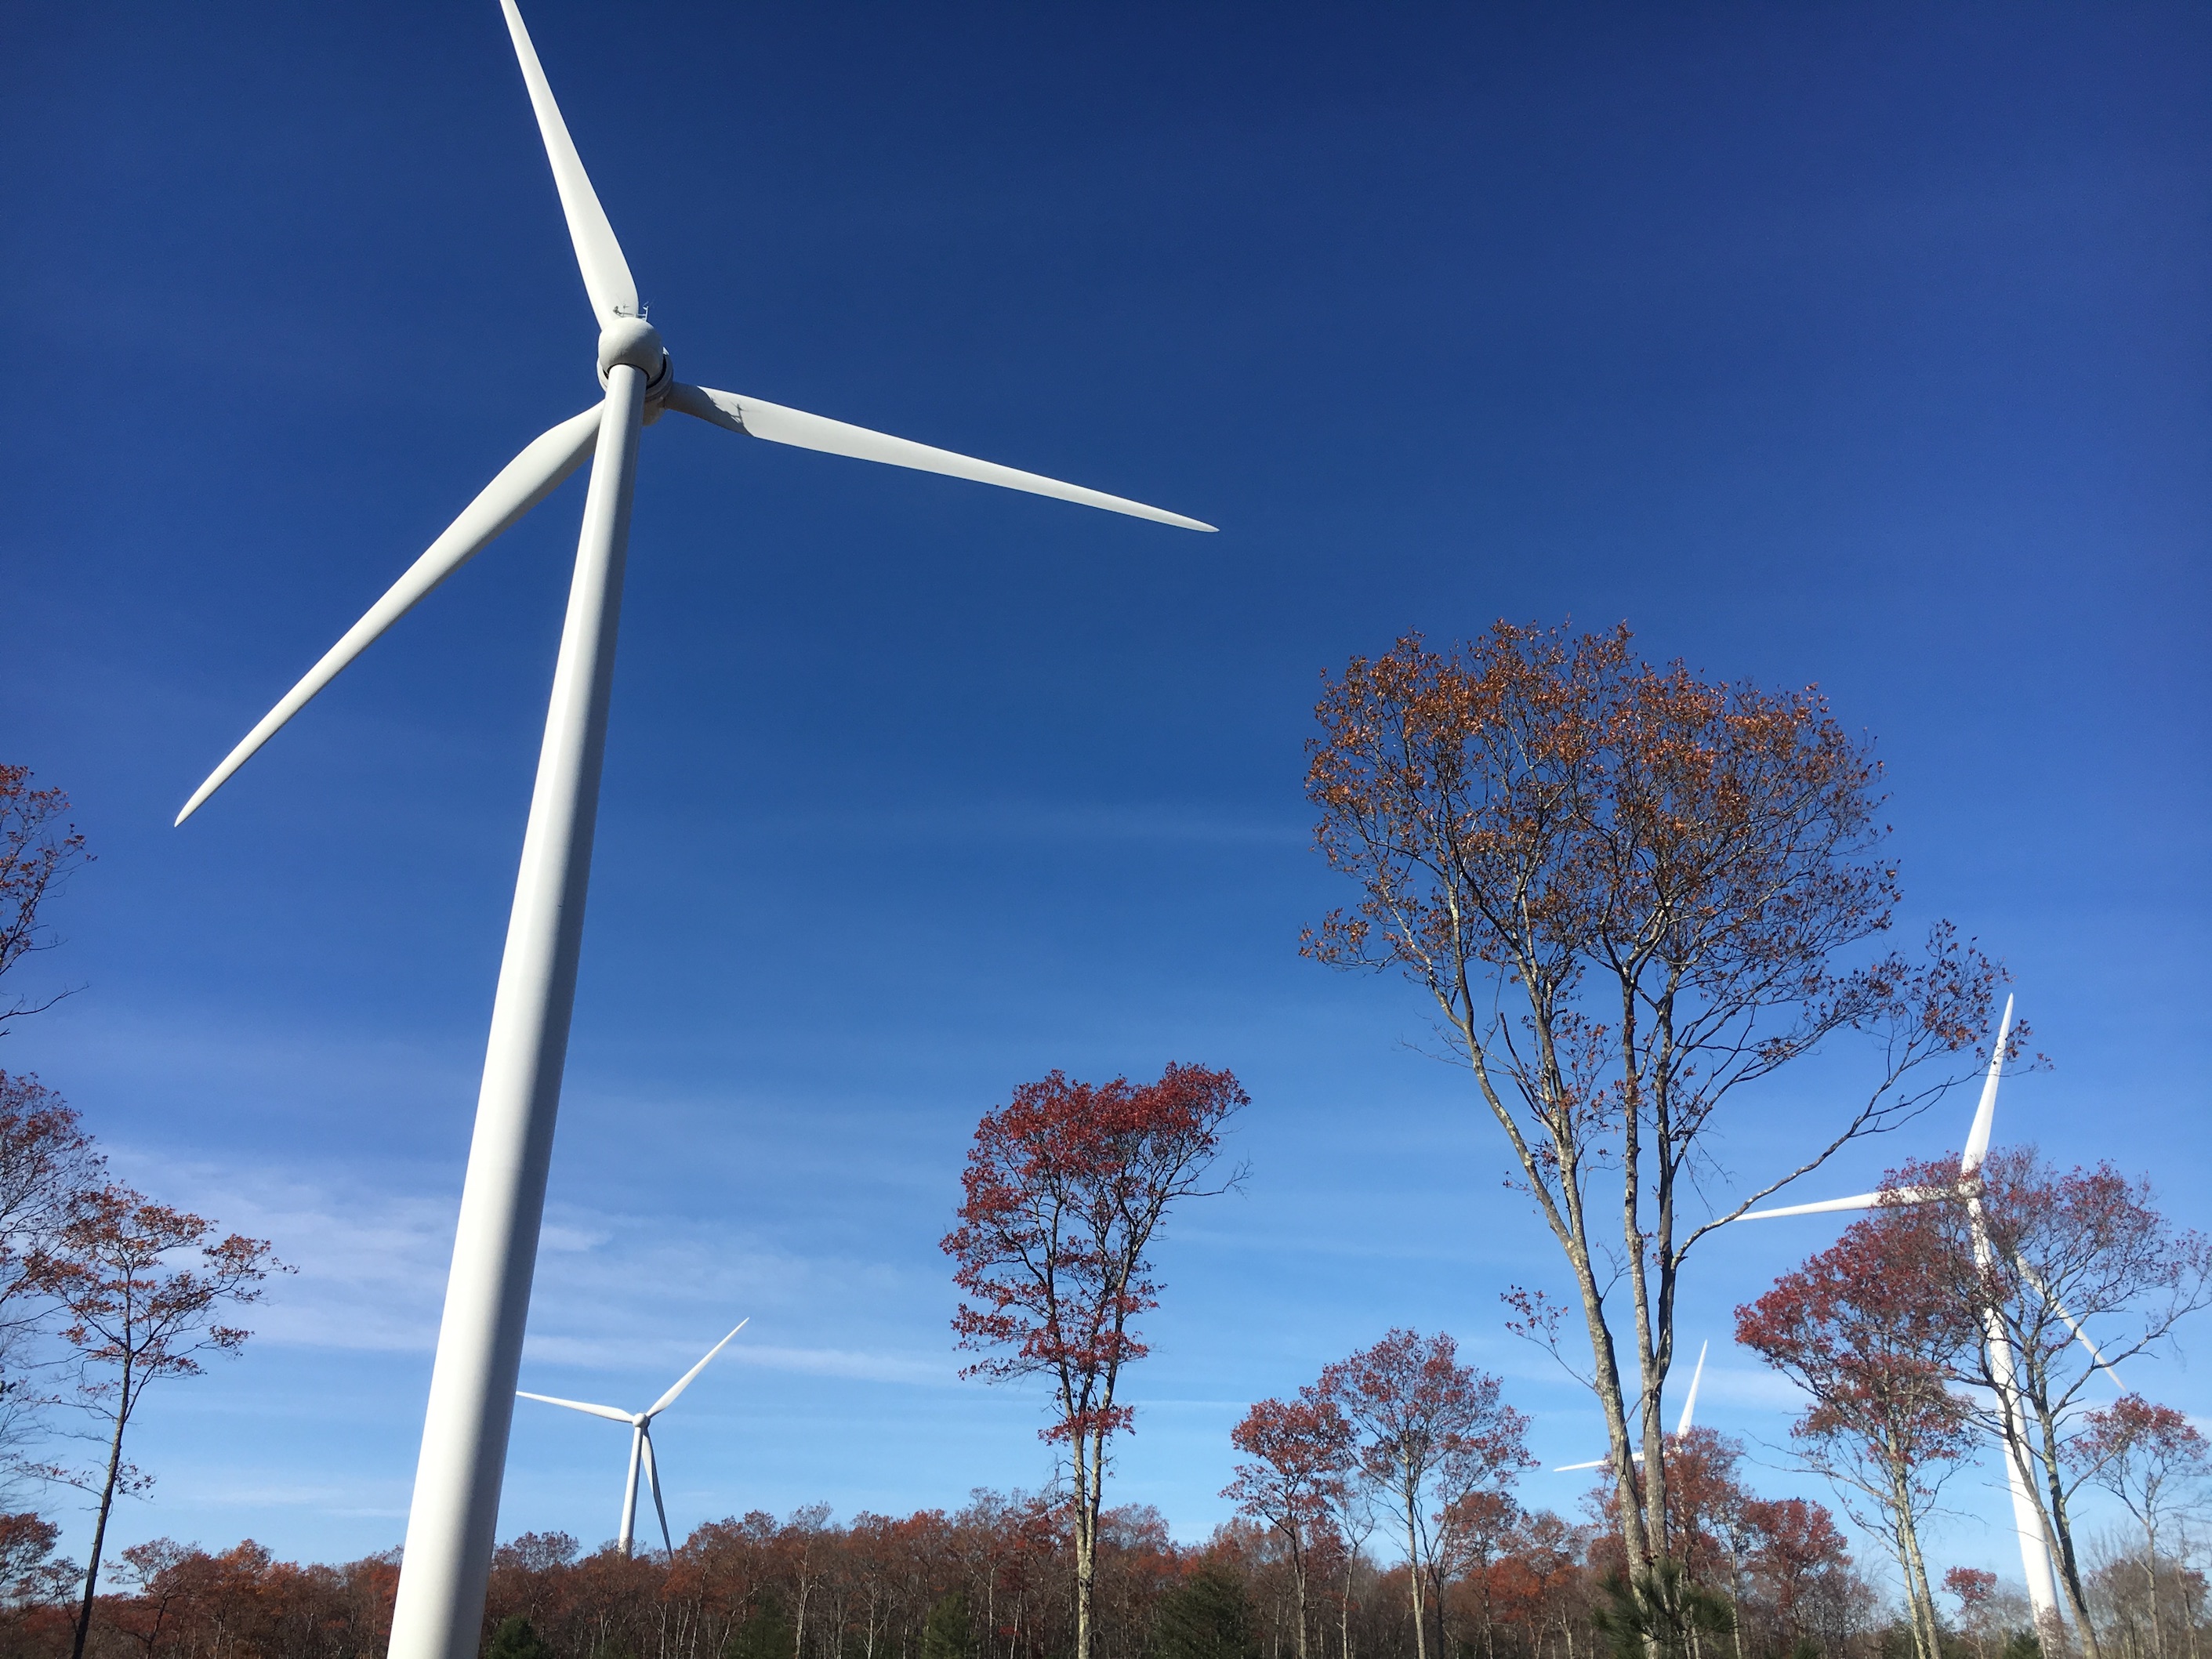 Wind in Coventry RI, Supported by our Green Power members